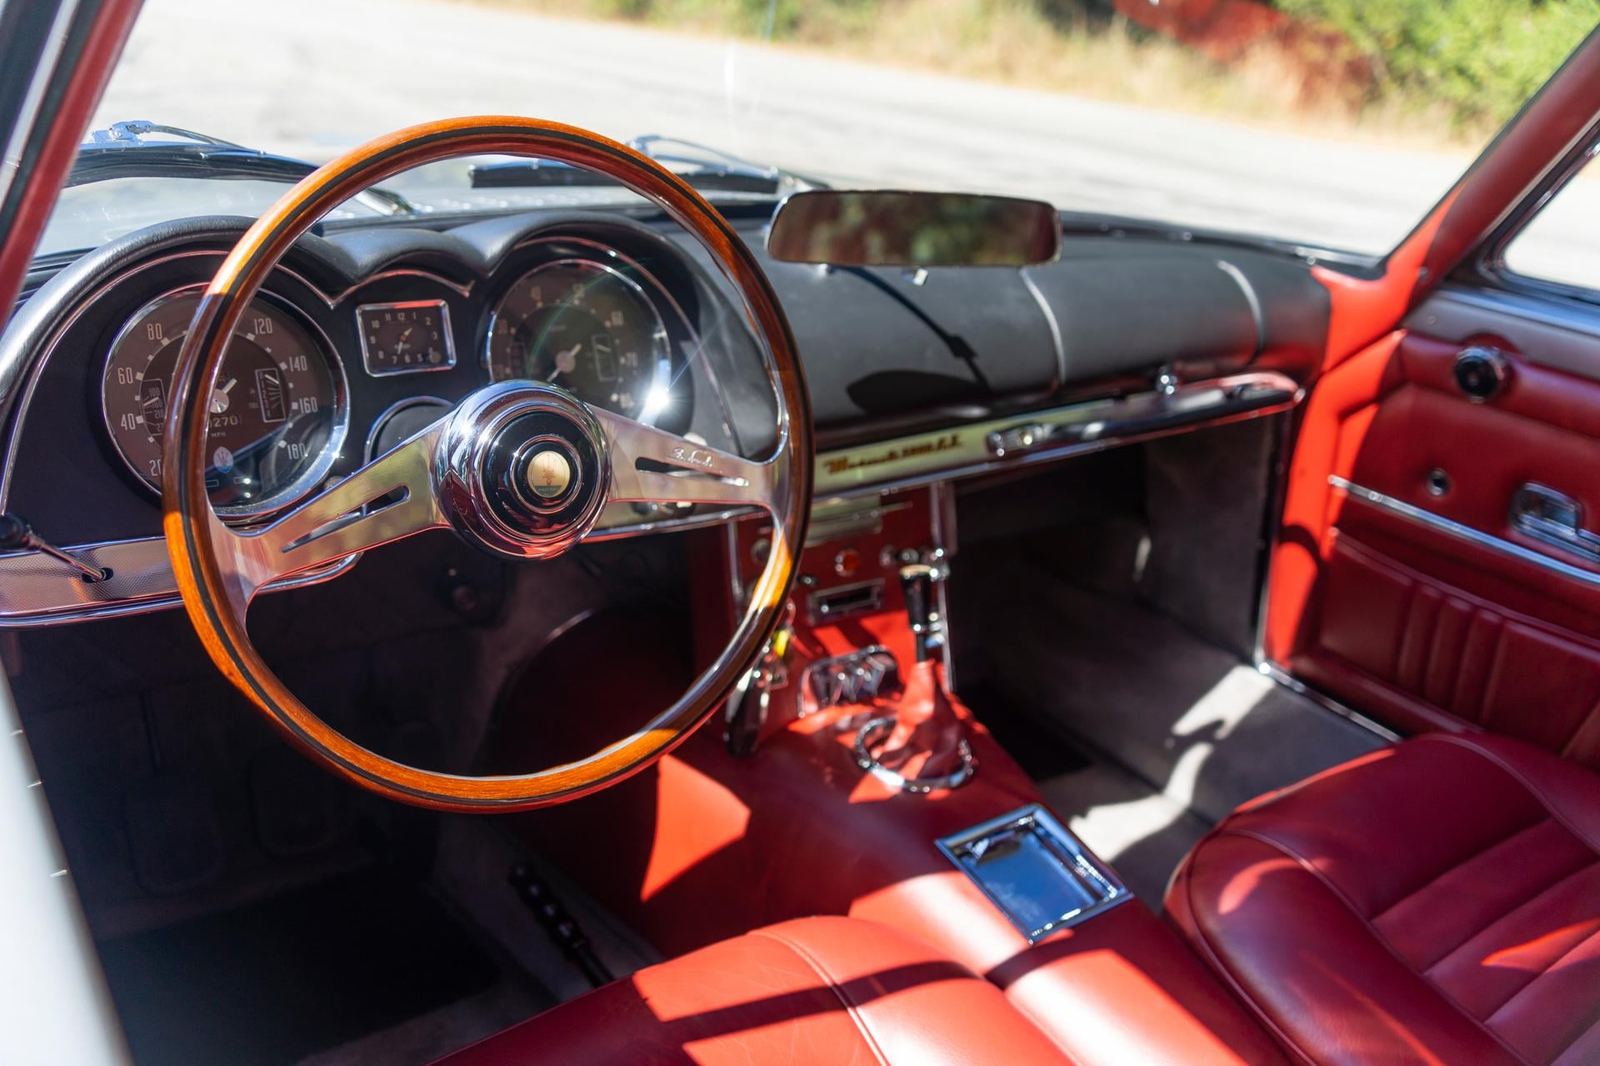 sports cars, classic cars, one-of-one 1961 maserati 5000 gt just sold for a million dollars